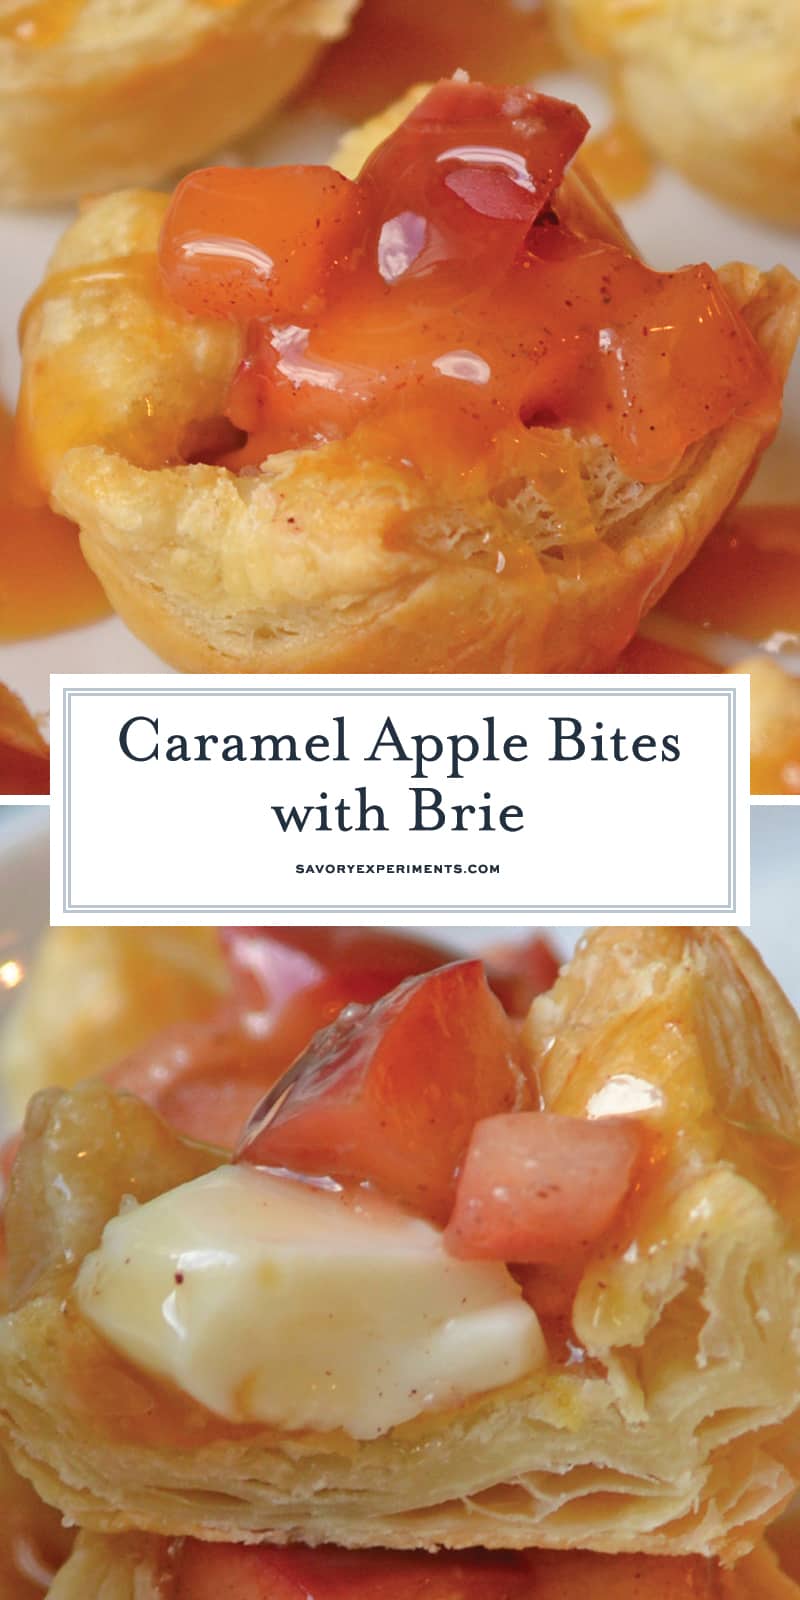 Caramel Apple Bites with Brie are a quick apple tart recipe using puff pastry. The best mix between mini caramel apples and salted caramel apple pie! #caramelapplebites #minicaramelapples www.savoryexperiments.com 